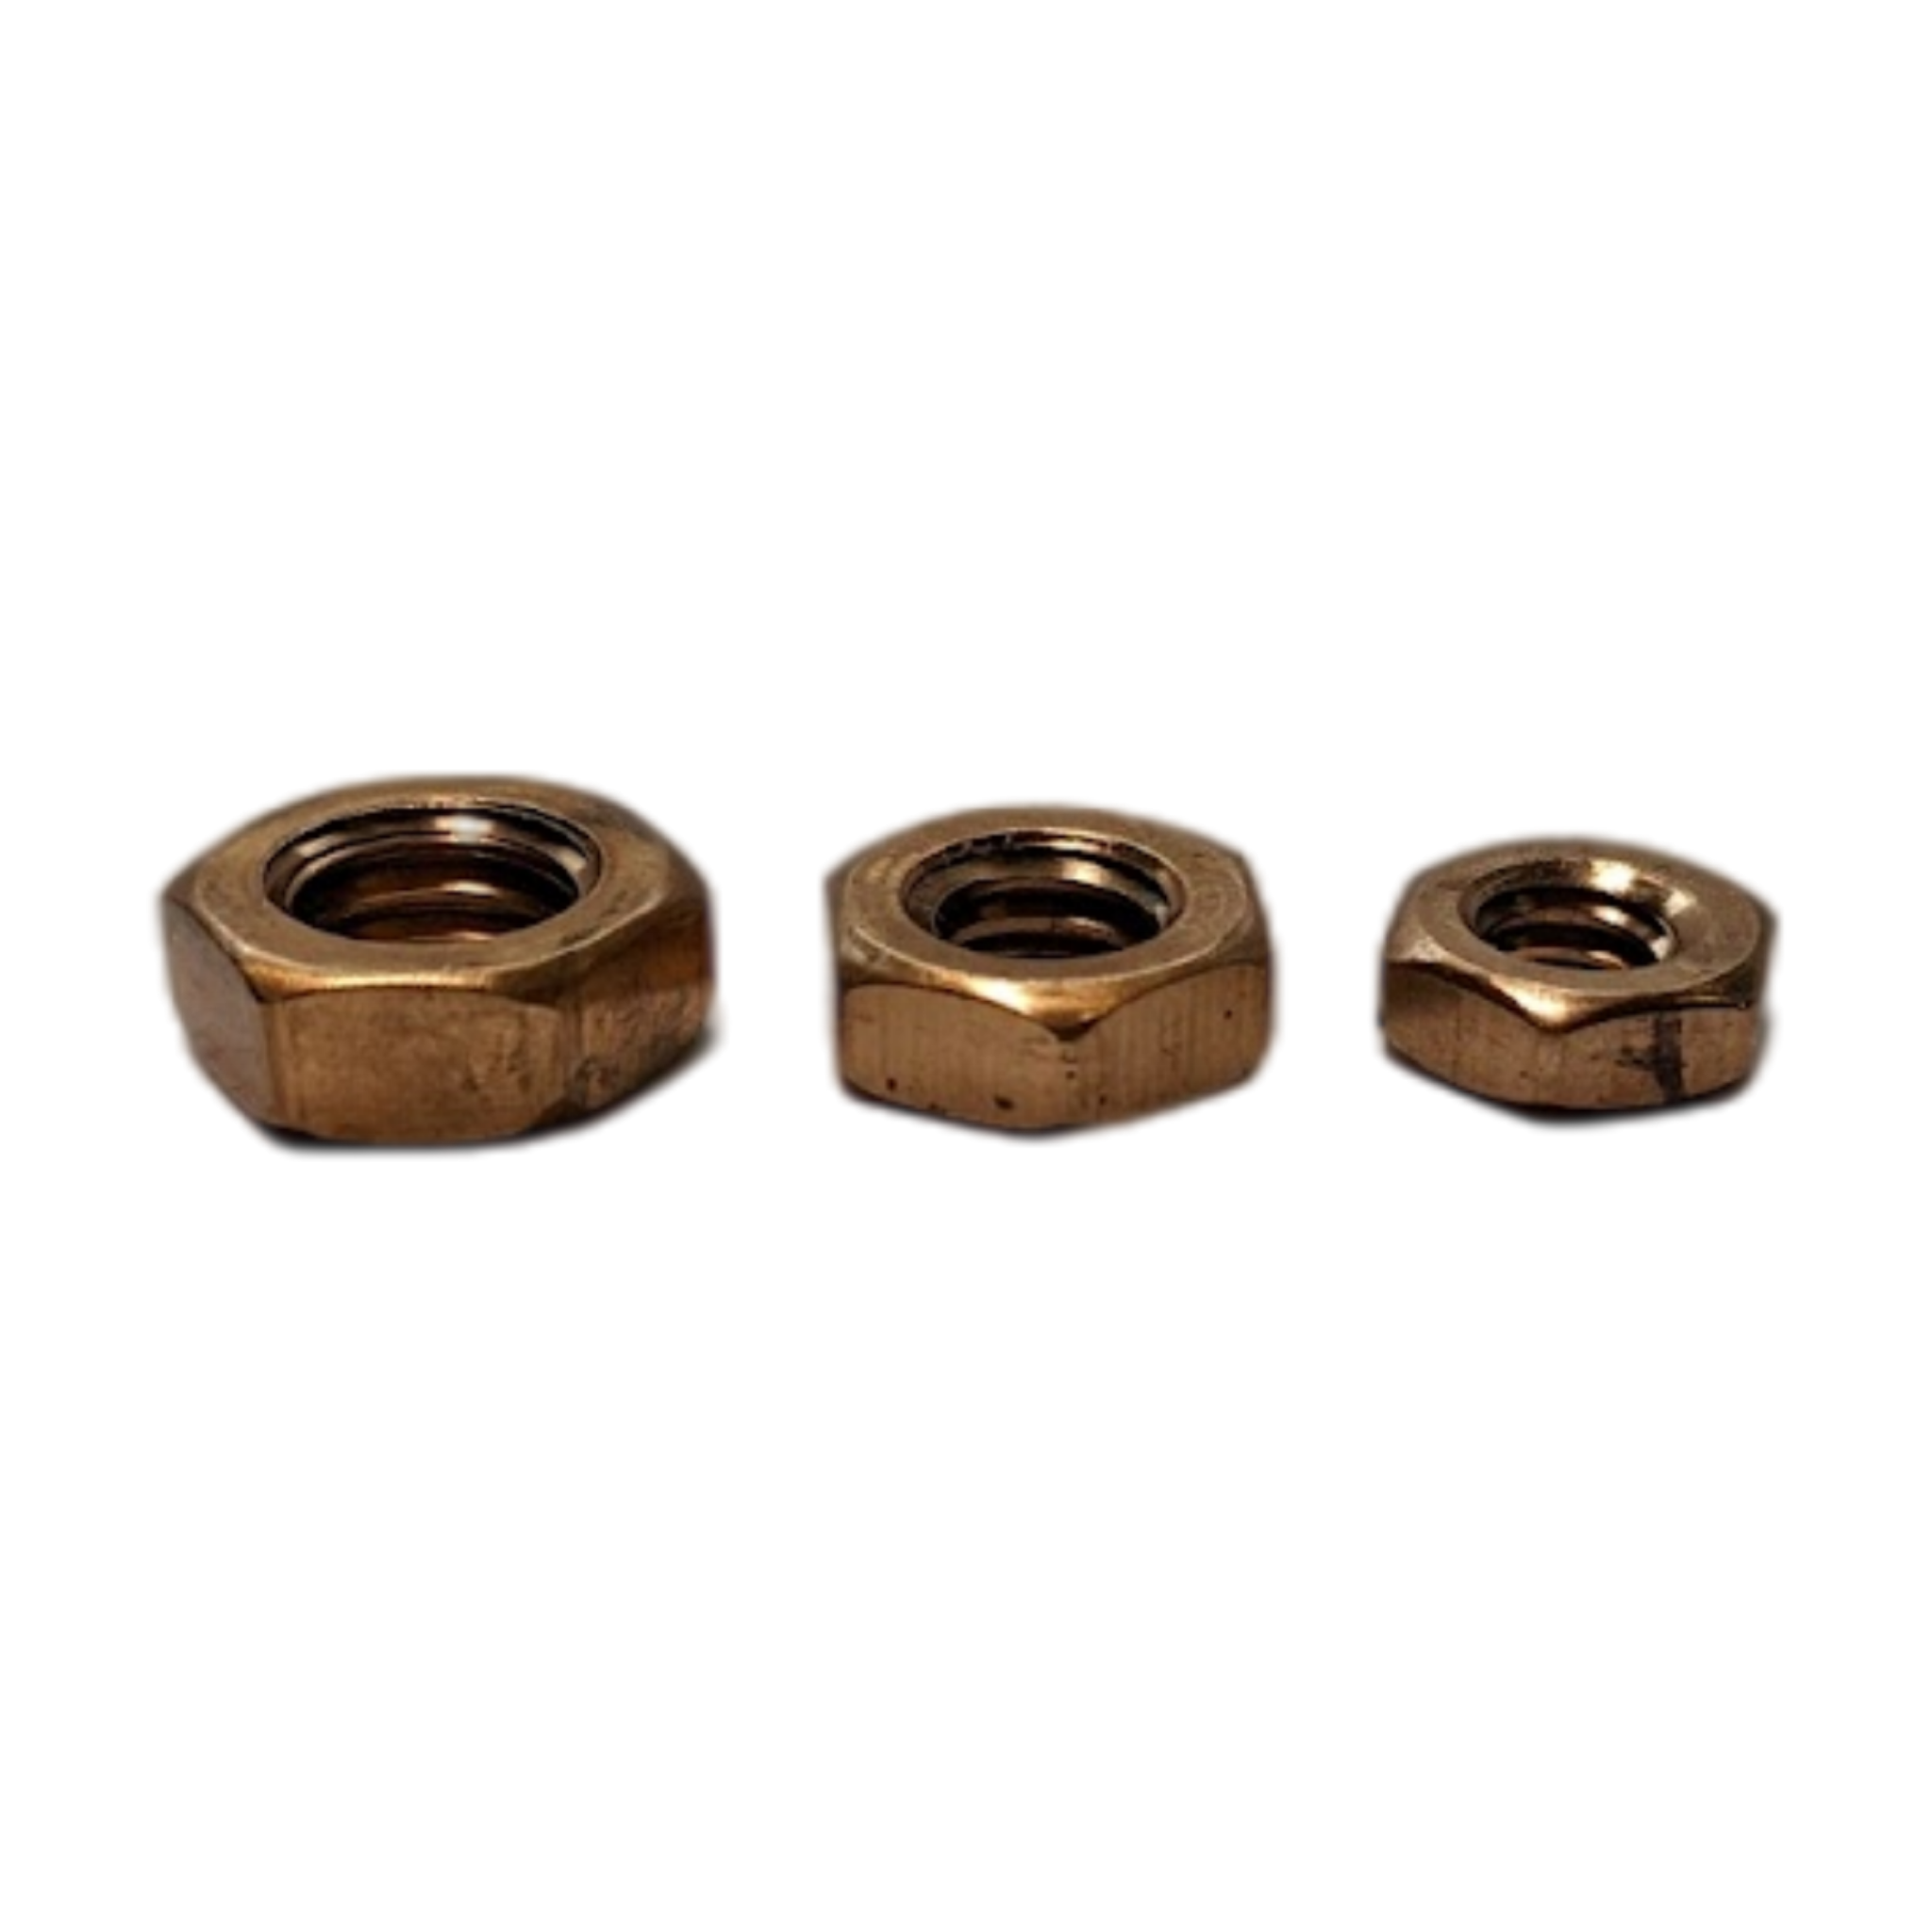 Silicon Bronze Heavy Hex Nuts - 3/8 to 1 Sizes